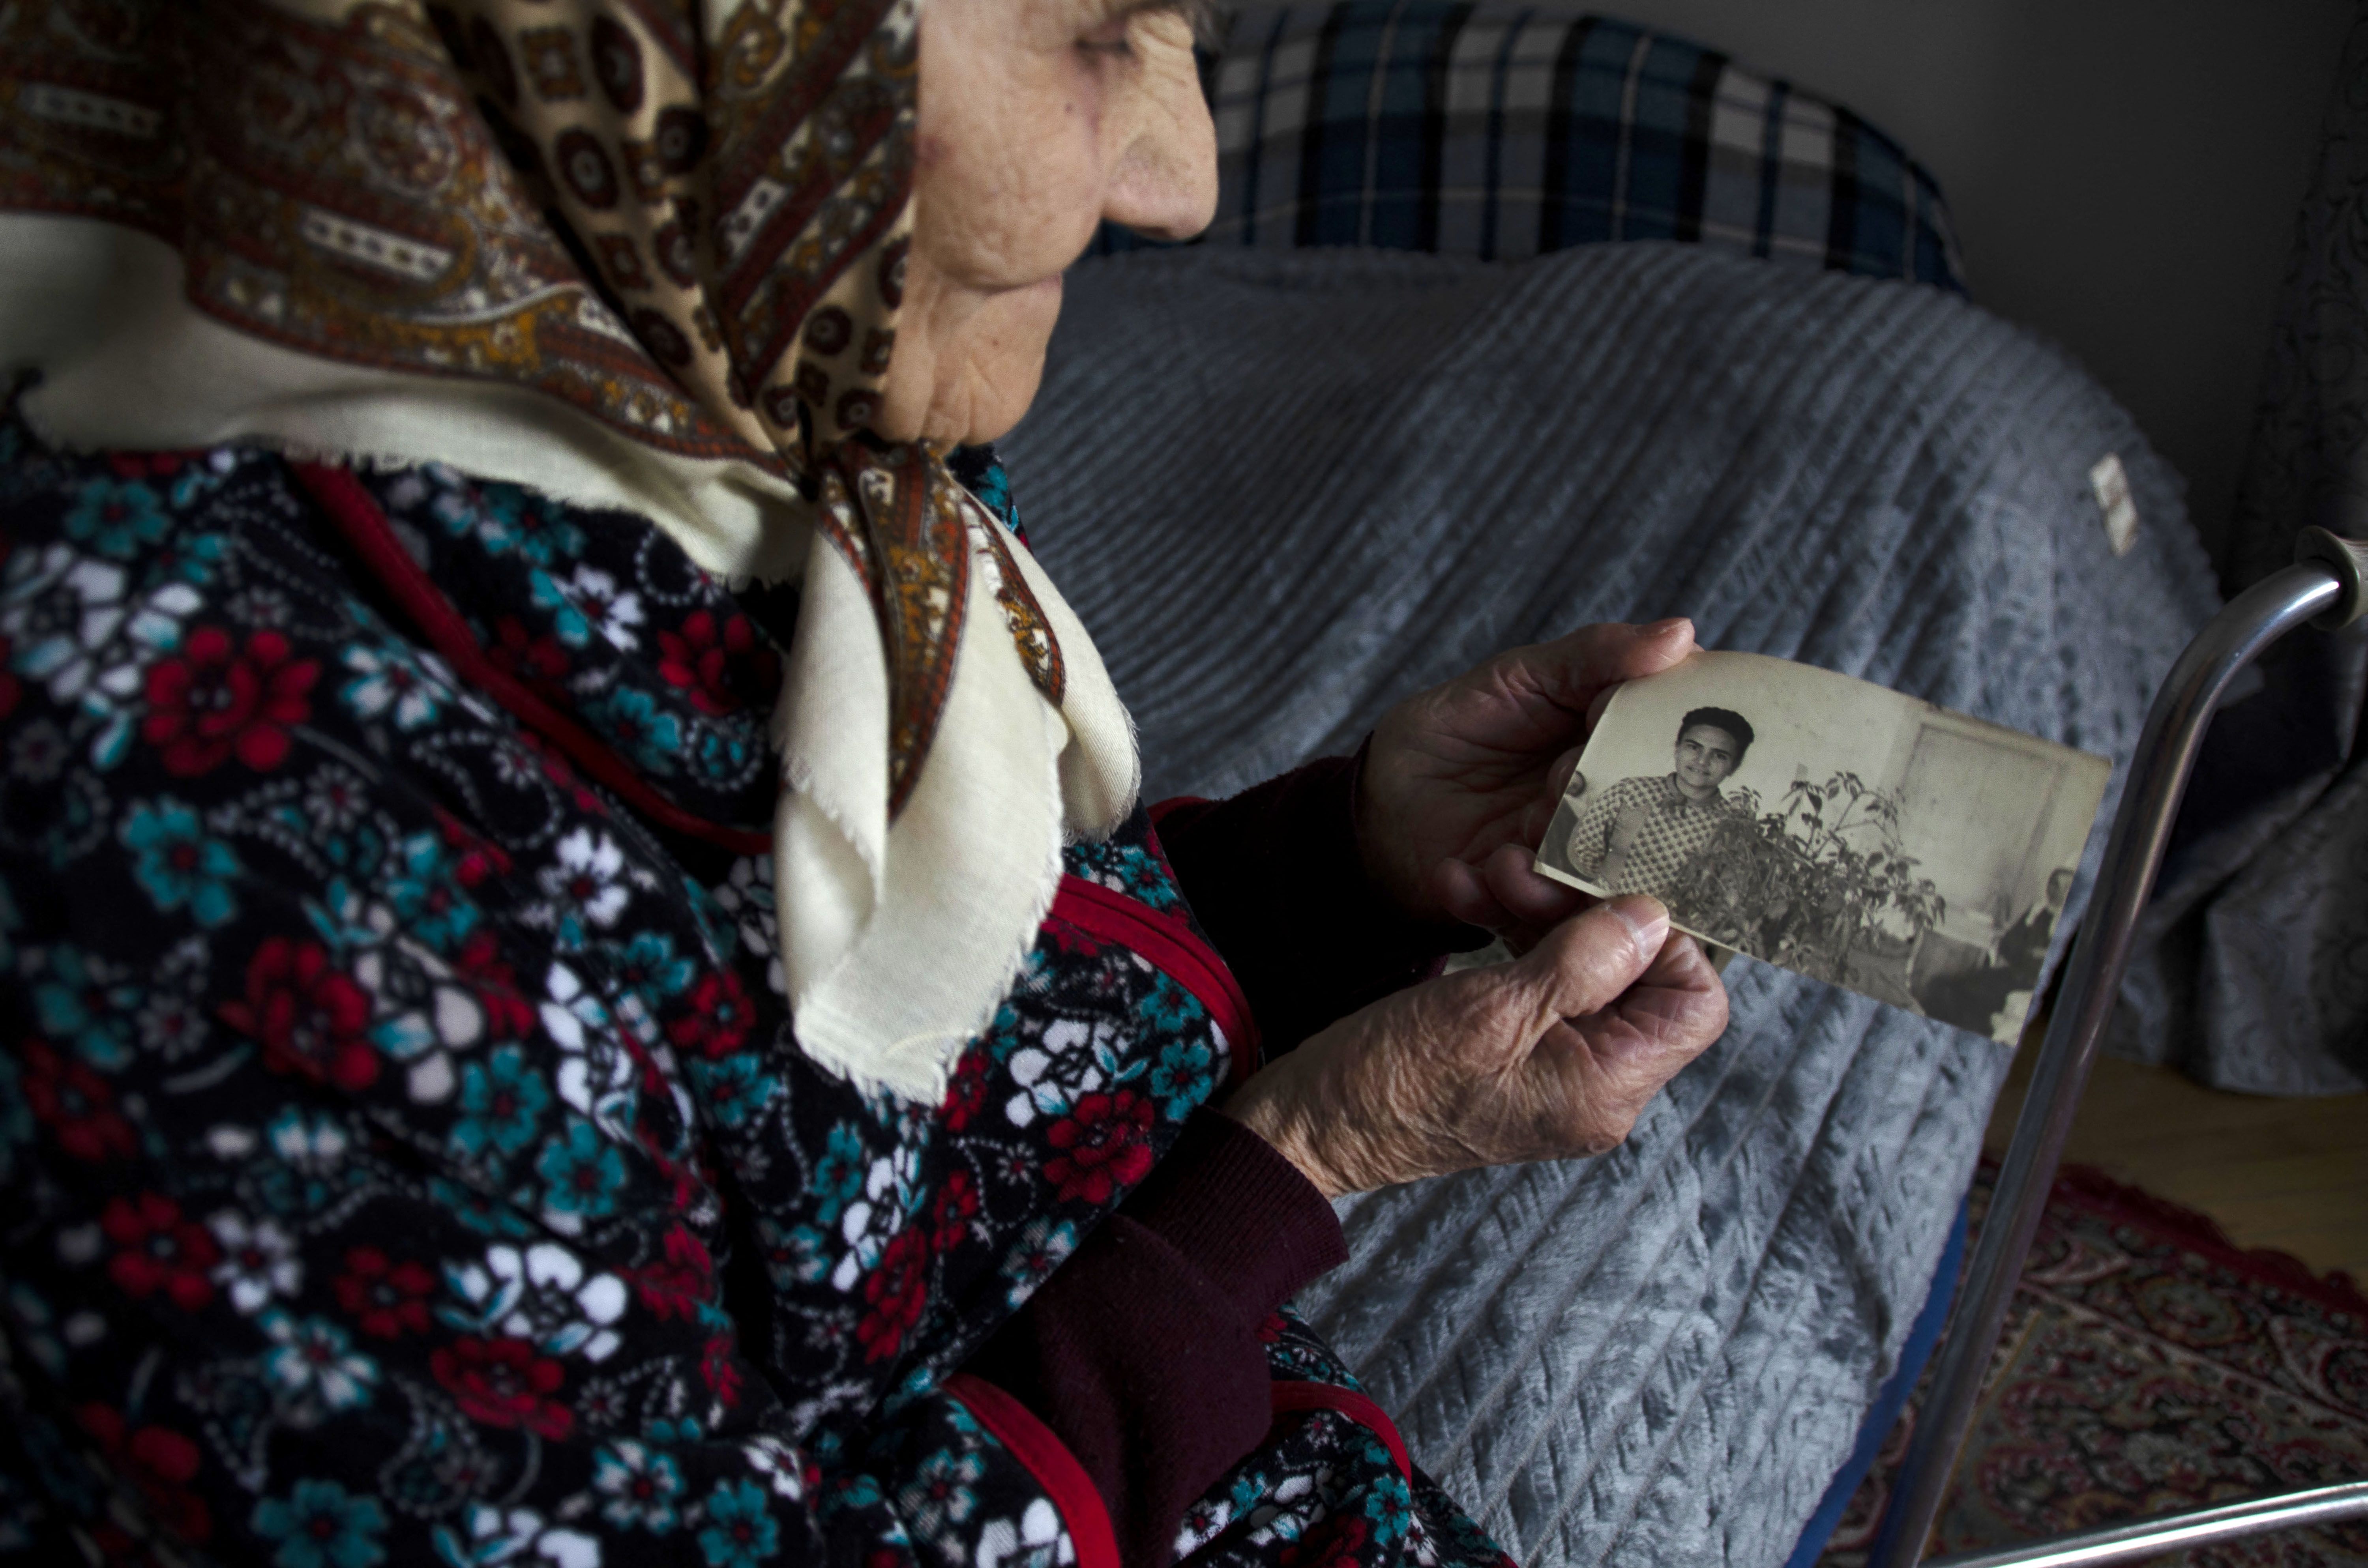 Rozalia Choba, 98, who was a political prisoner in Siberia, shows an old photo of her, at her home in the village of Solonka, outside Lviv, western Ukraine, on March 8.